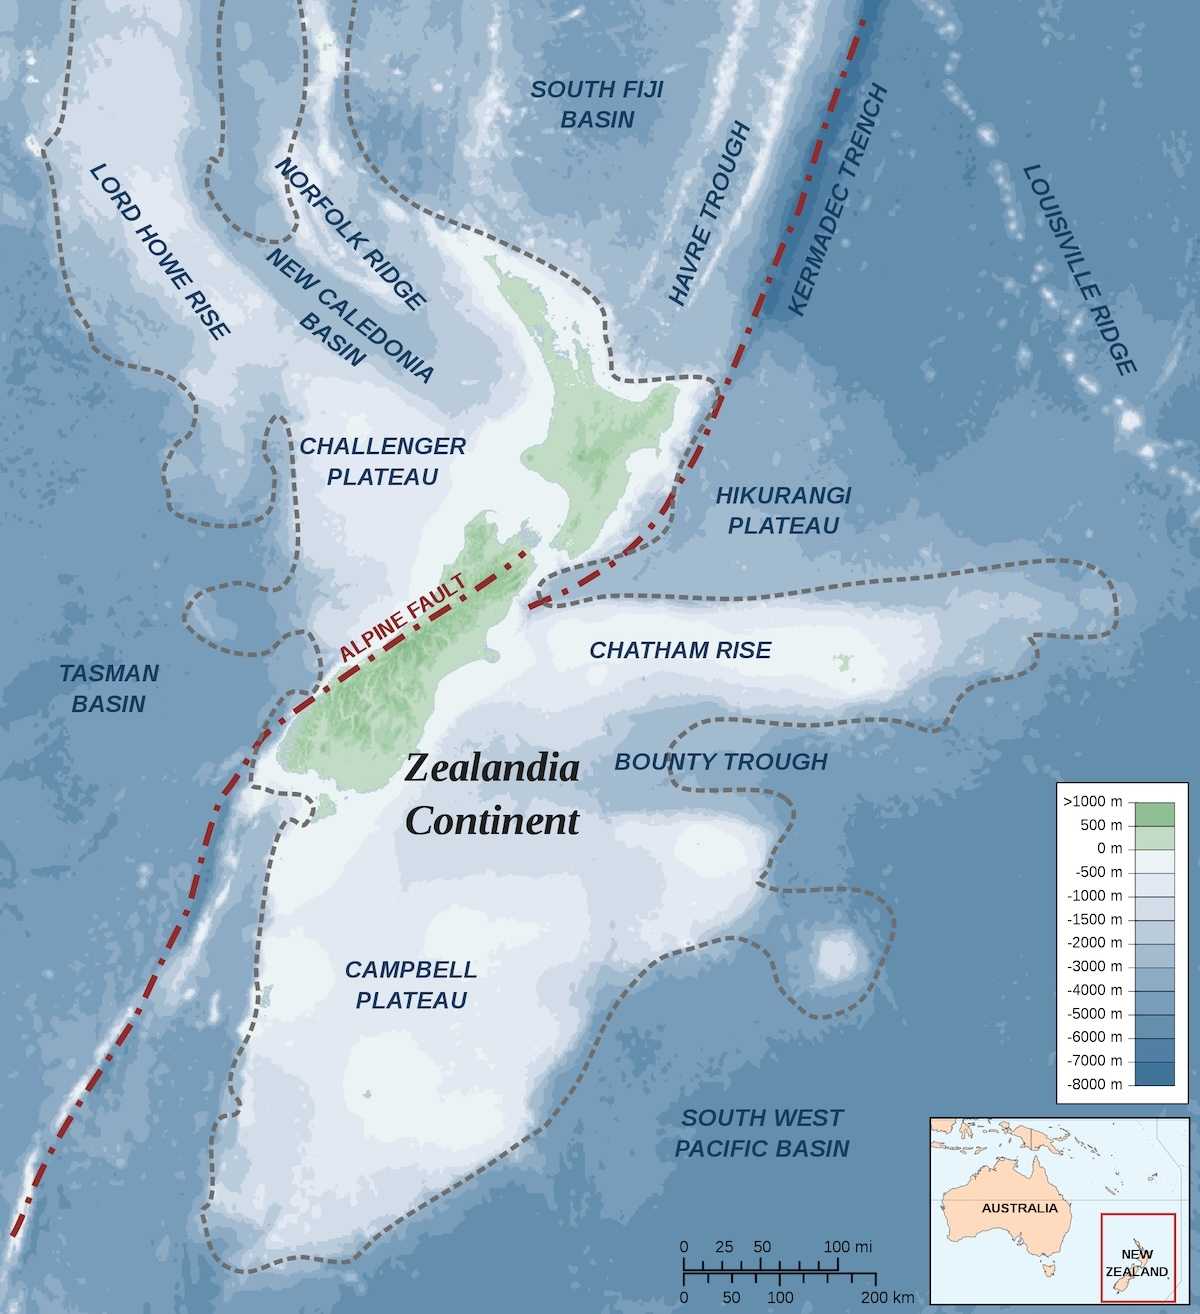 Map of the southern part of Zealandia showing the Alpine Fault.